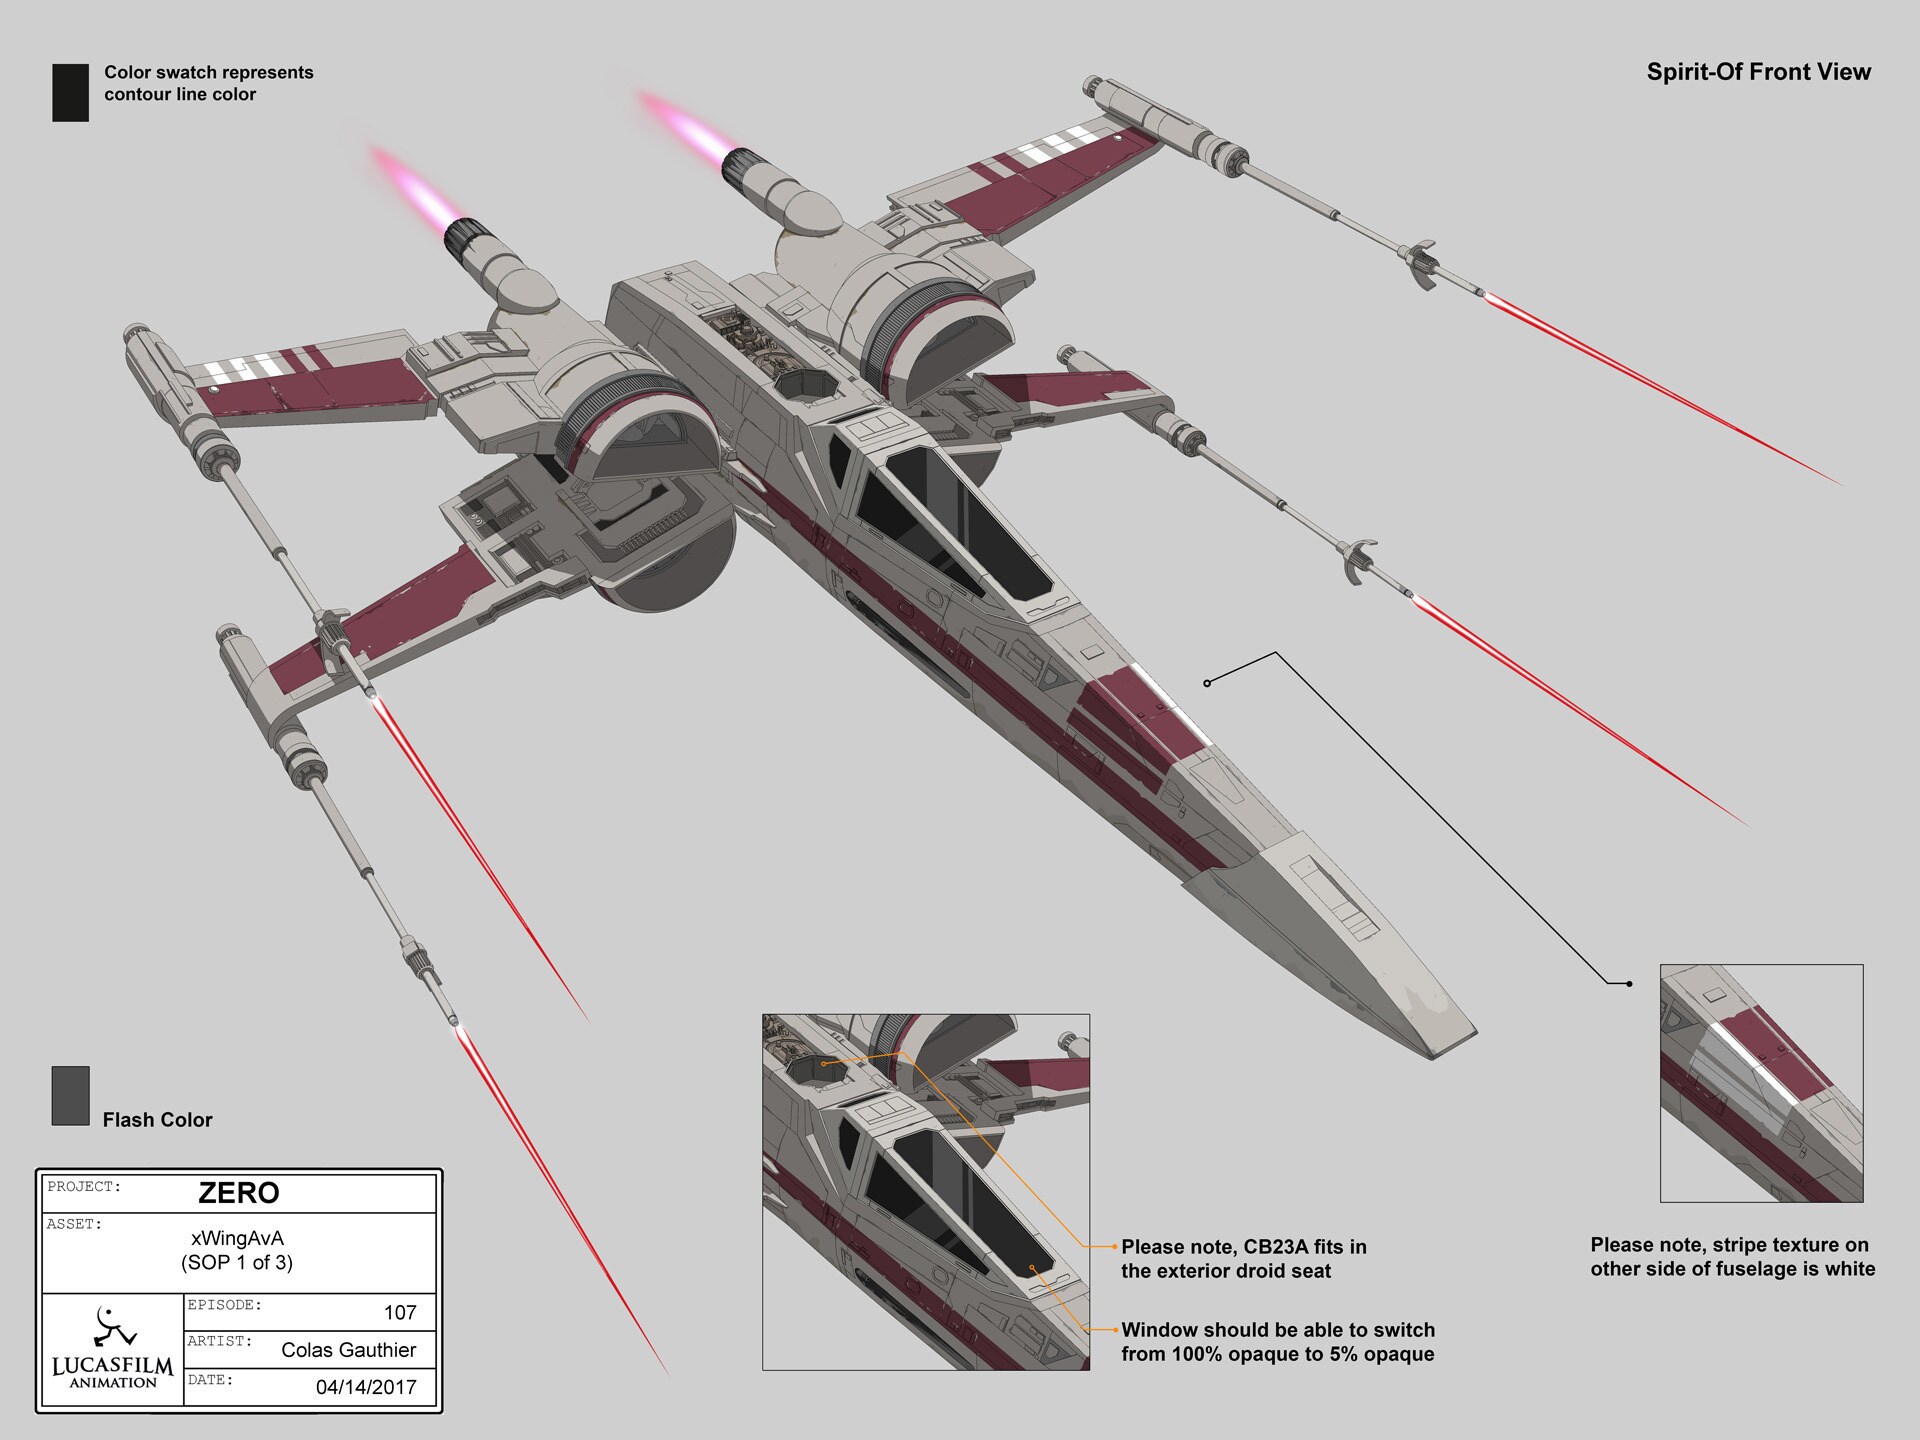 X-wing illustration by Colas Gauthier.